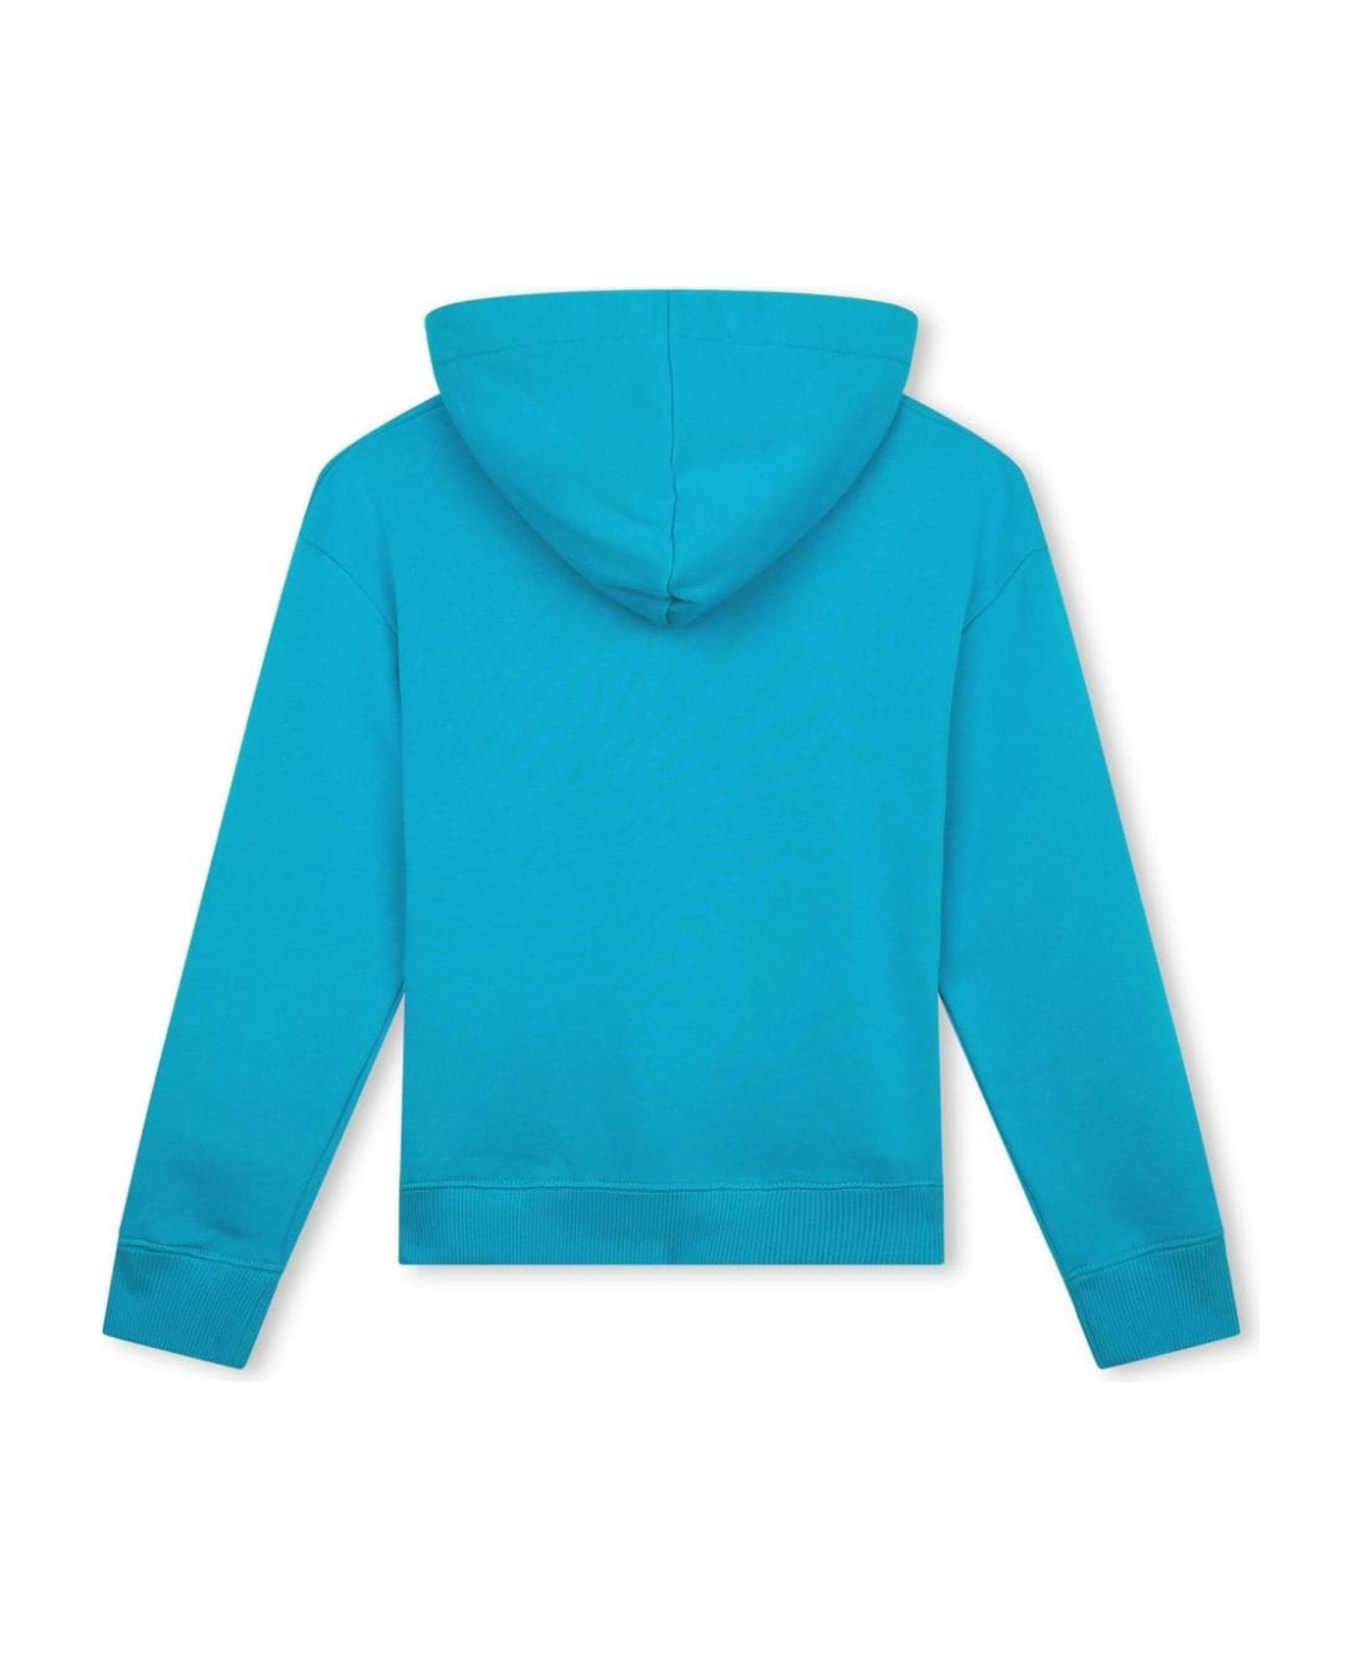 Lanvin Sweaters Turquoise - Turquoise